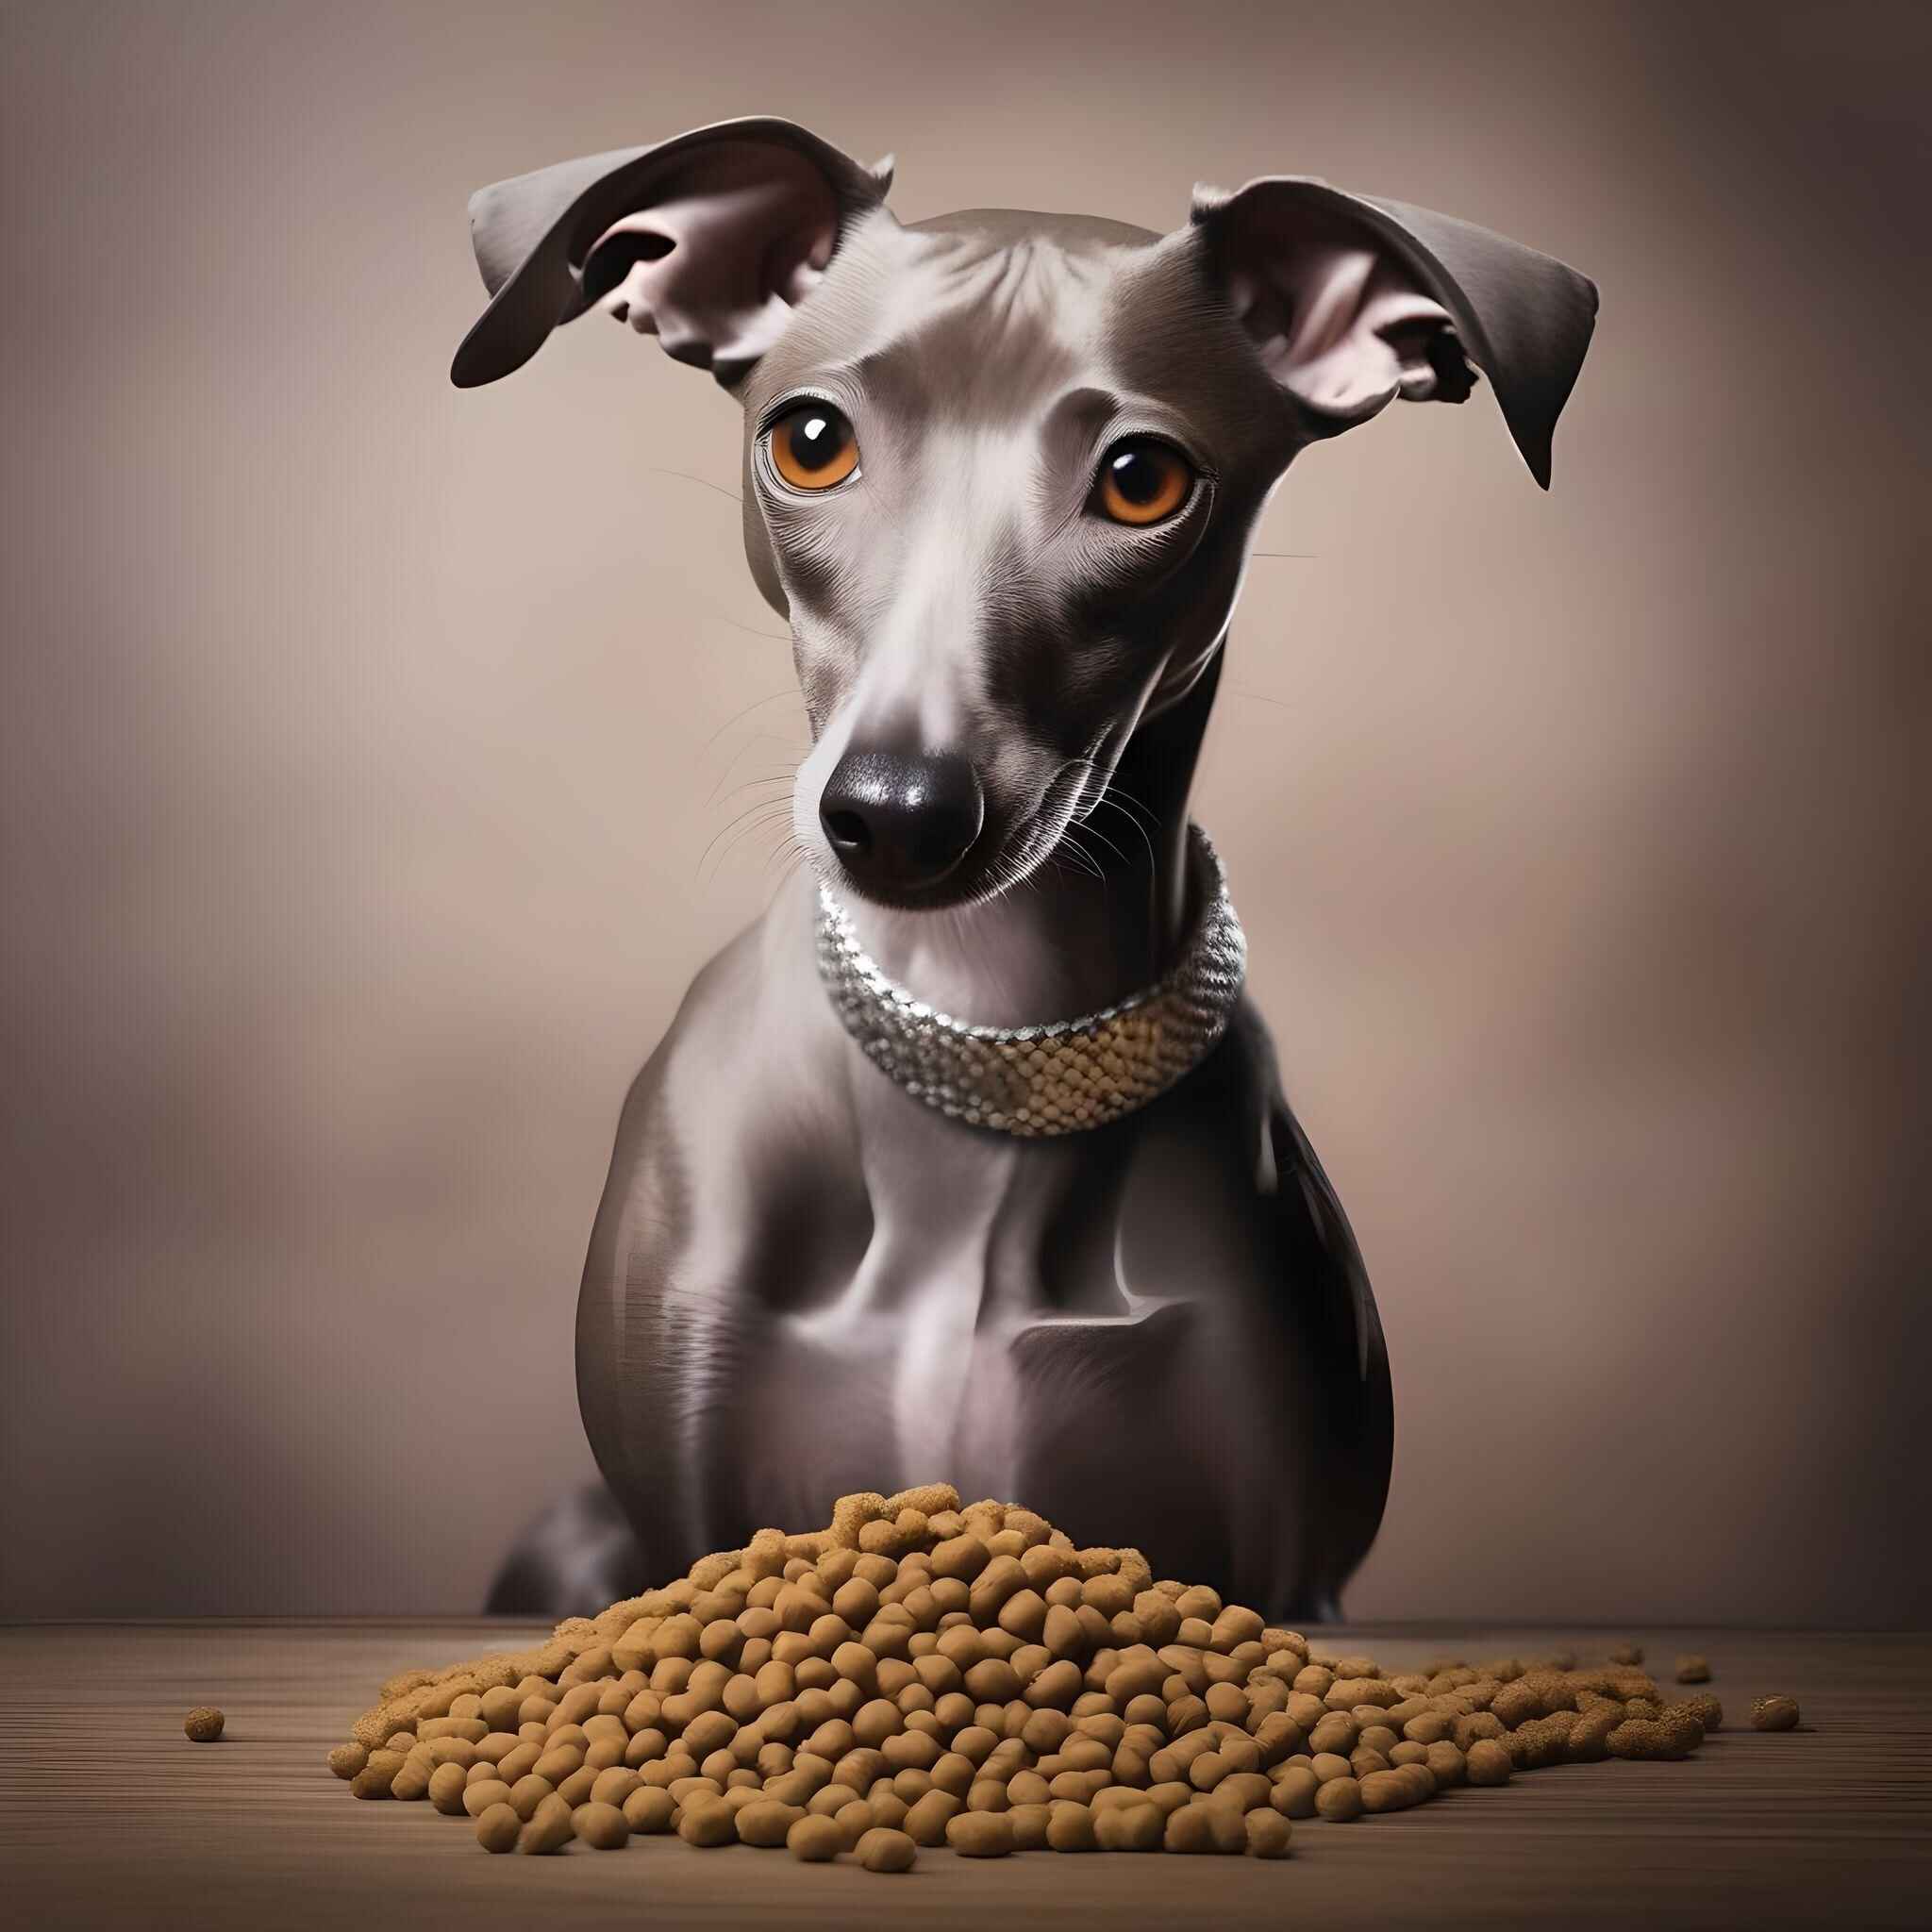 Best Dog Food for Italian Greyhounds